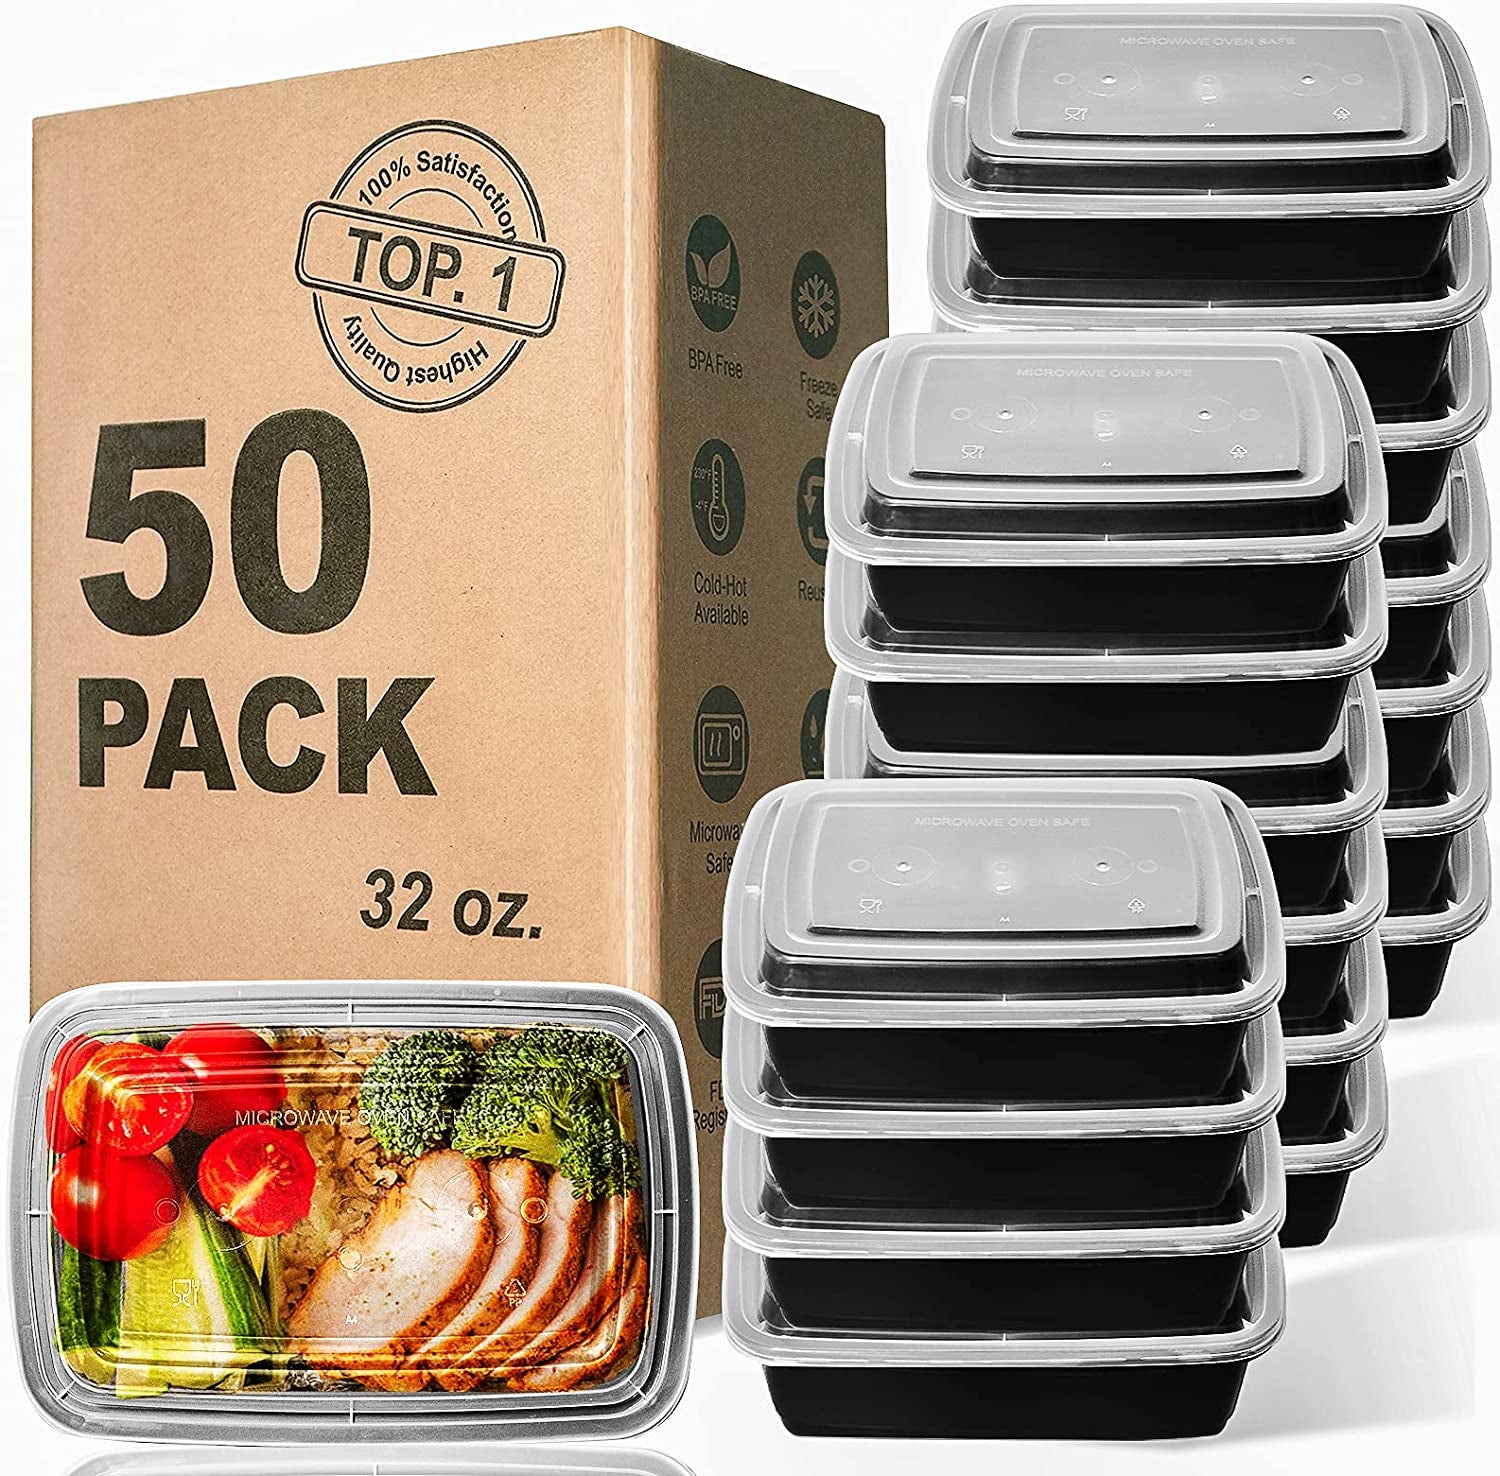 Meal Prep Containers, 32OZ 50 Pack Extra-Thick Food Storage Containers with Lids, Plastic Microwavable Bento Box Reusable Storage Lunch Boxes BPA Free, Stackable, Dishwasher/Freezer Safe